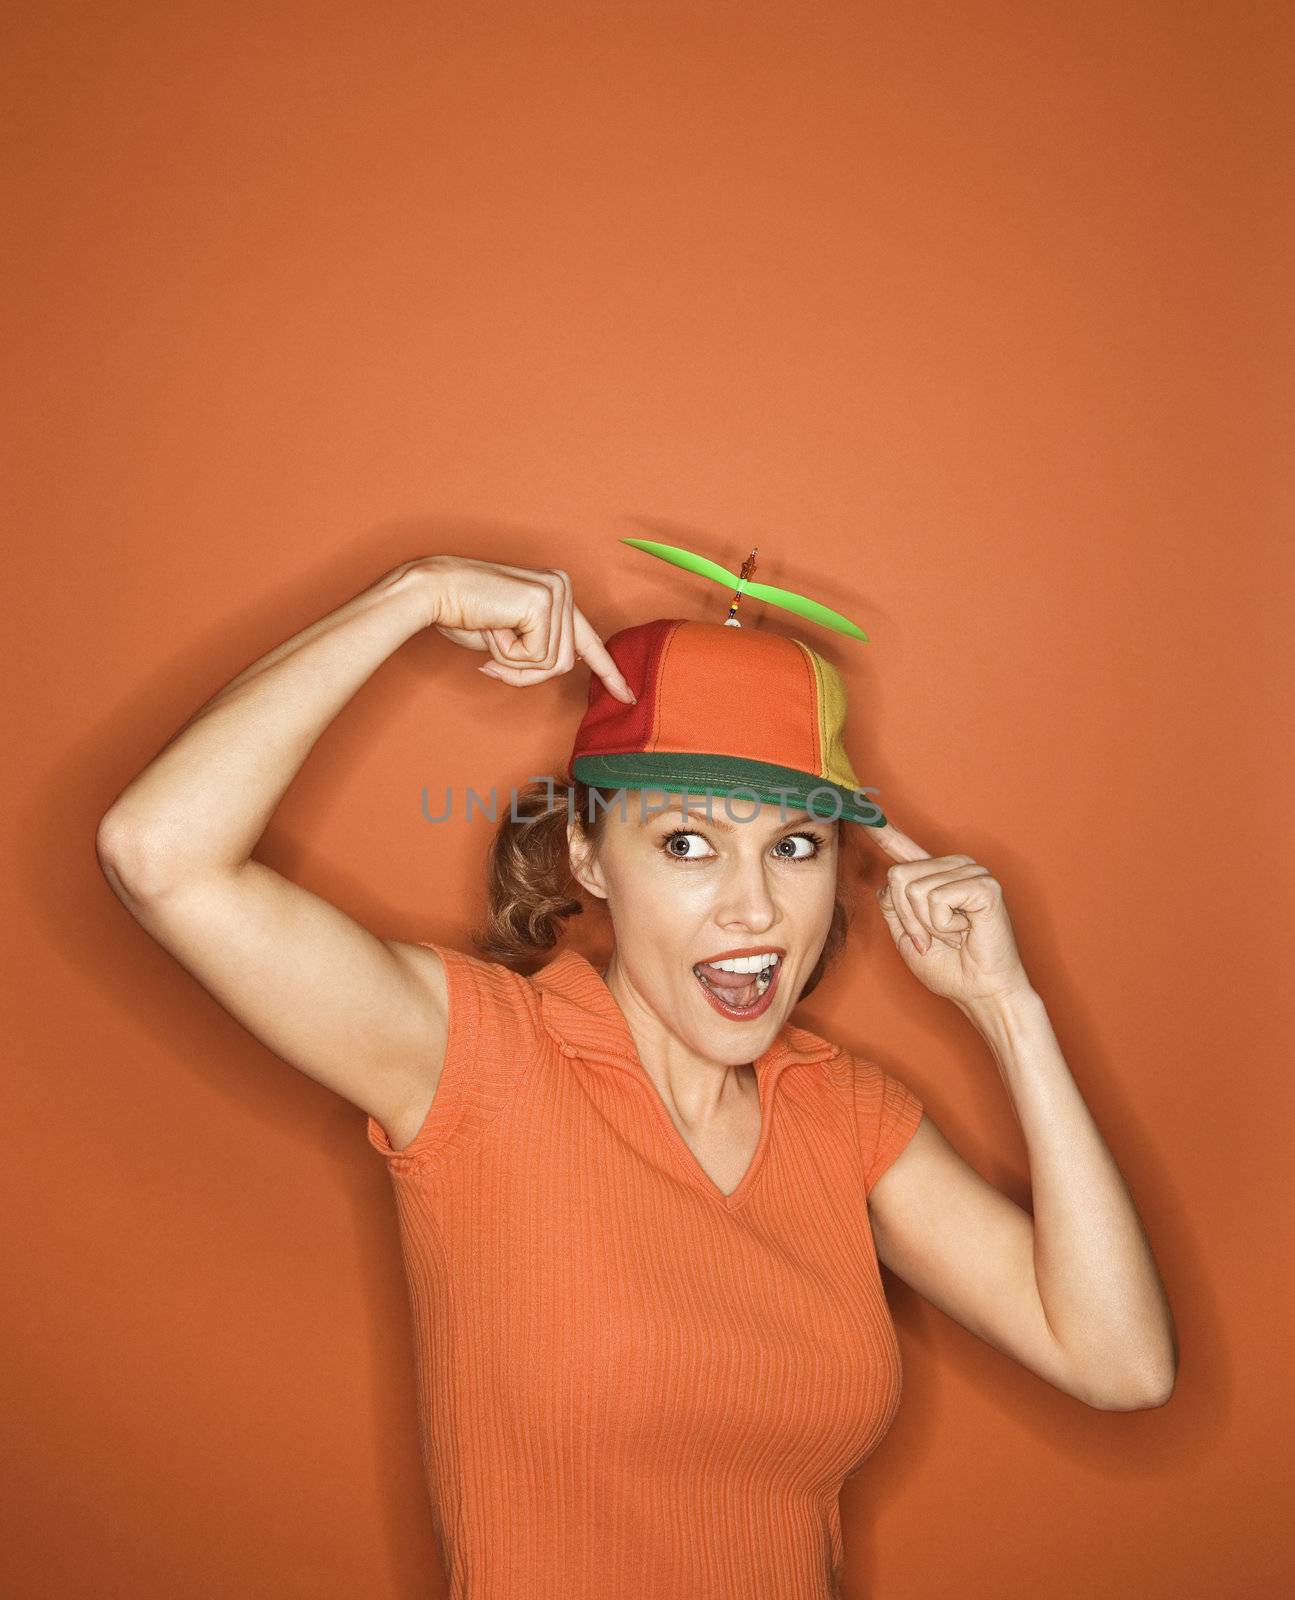 Smiling Caucasian mid-adult woman pointing and wearing propeller cap on orange background.